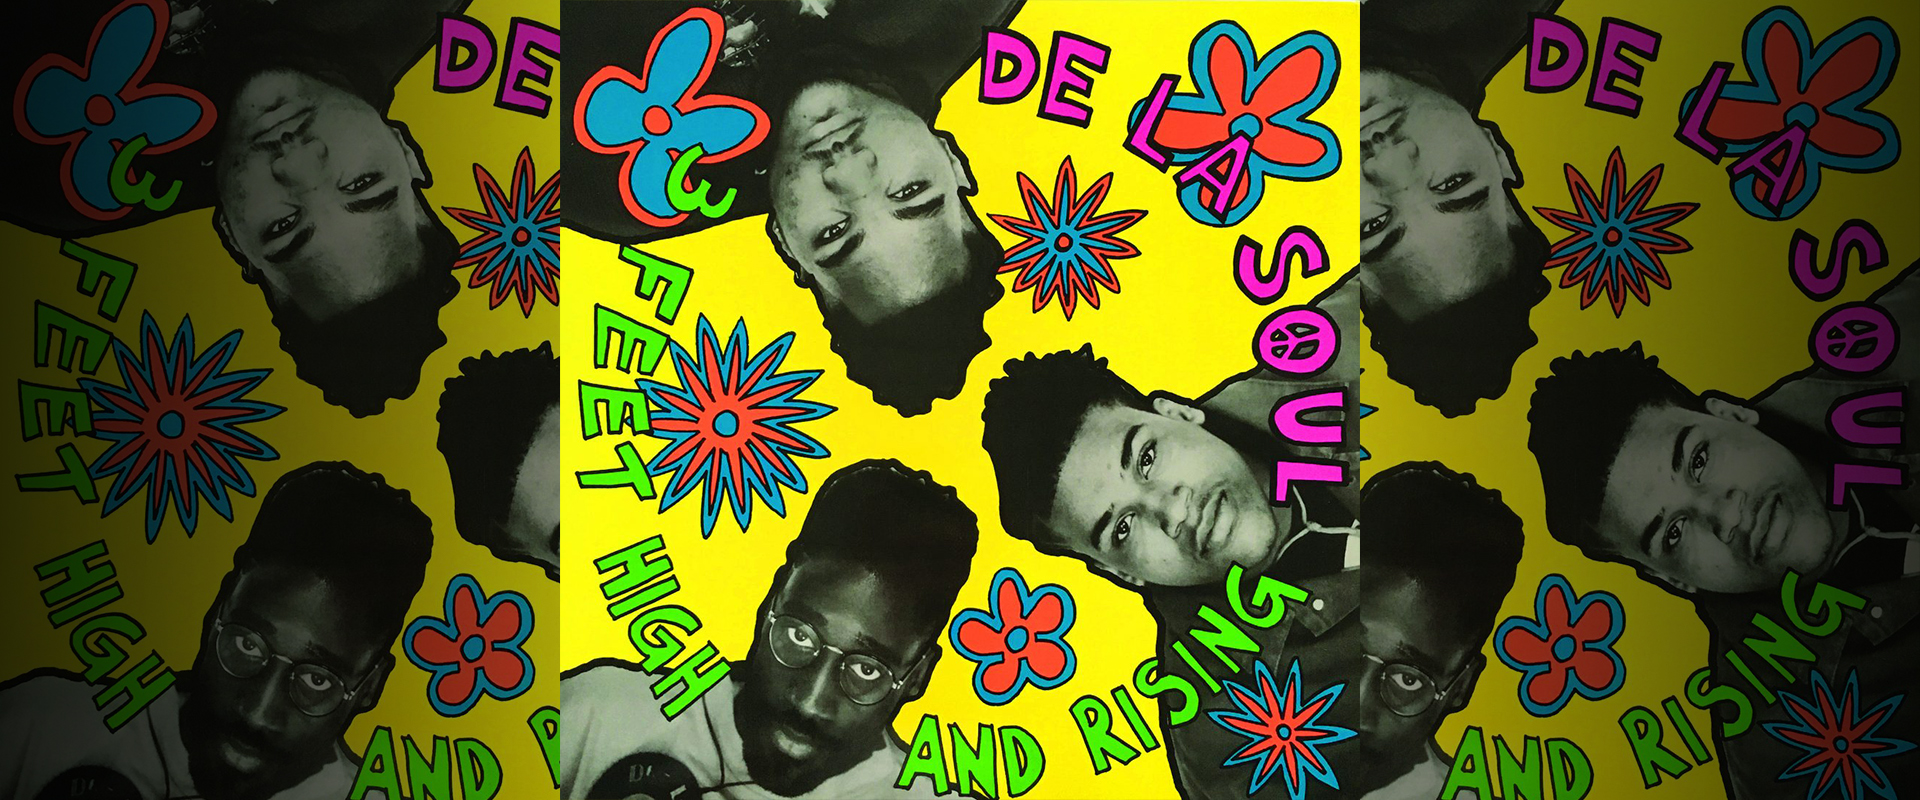 De La Soul Celebrates '3 Feet High And Rising' Anniversary With 